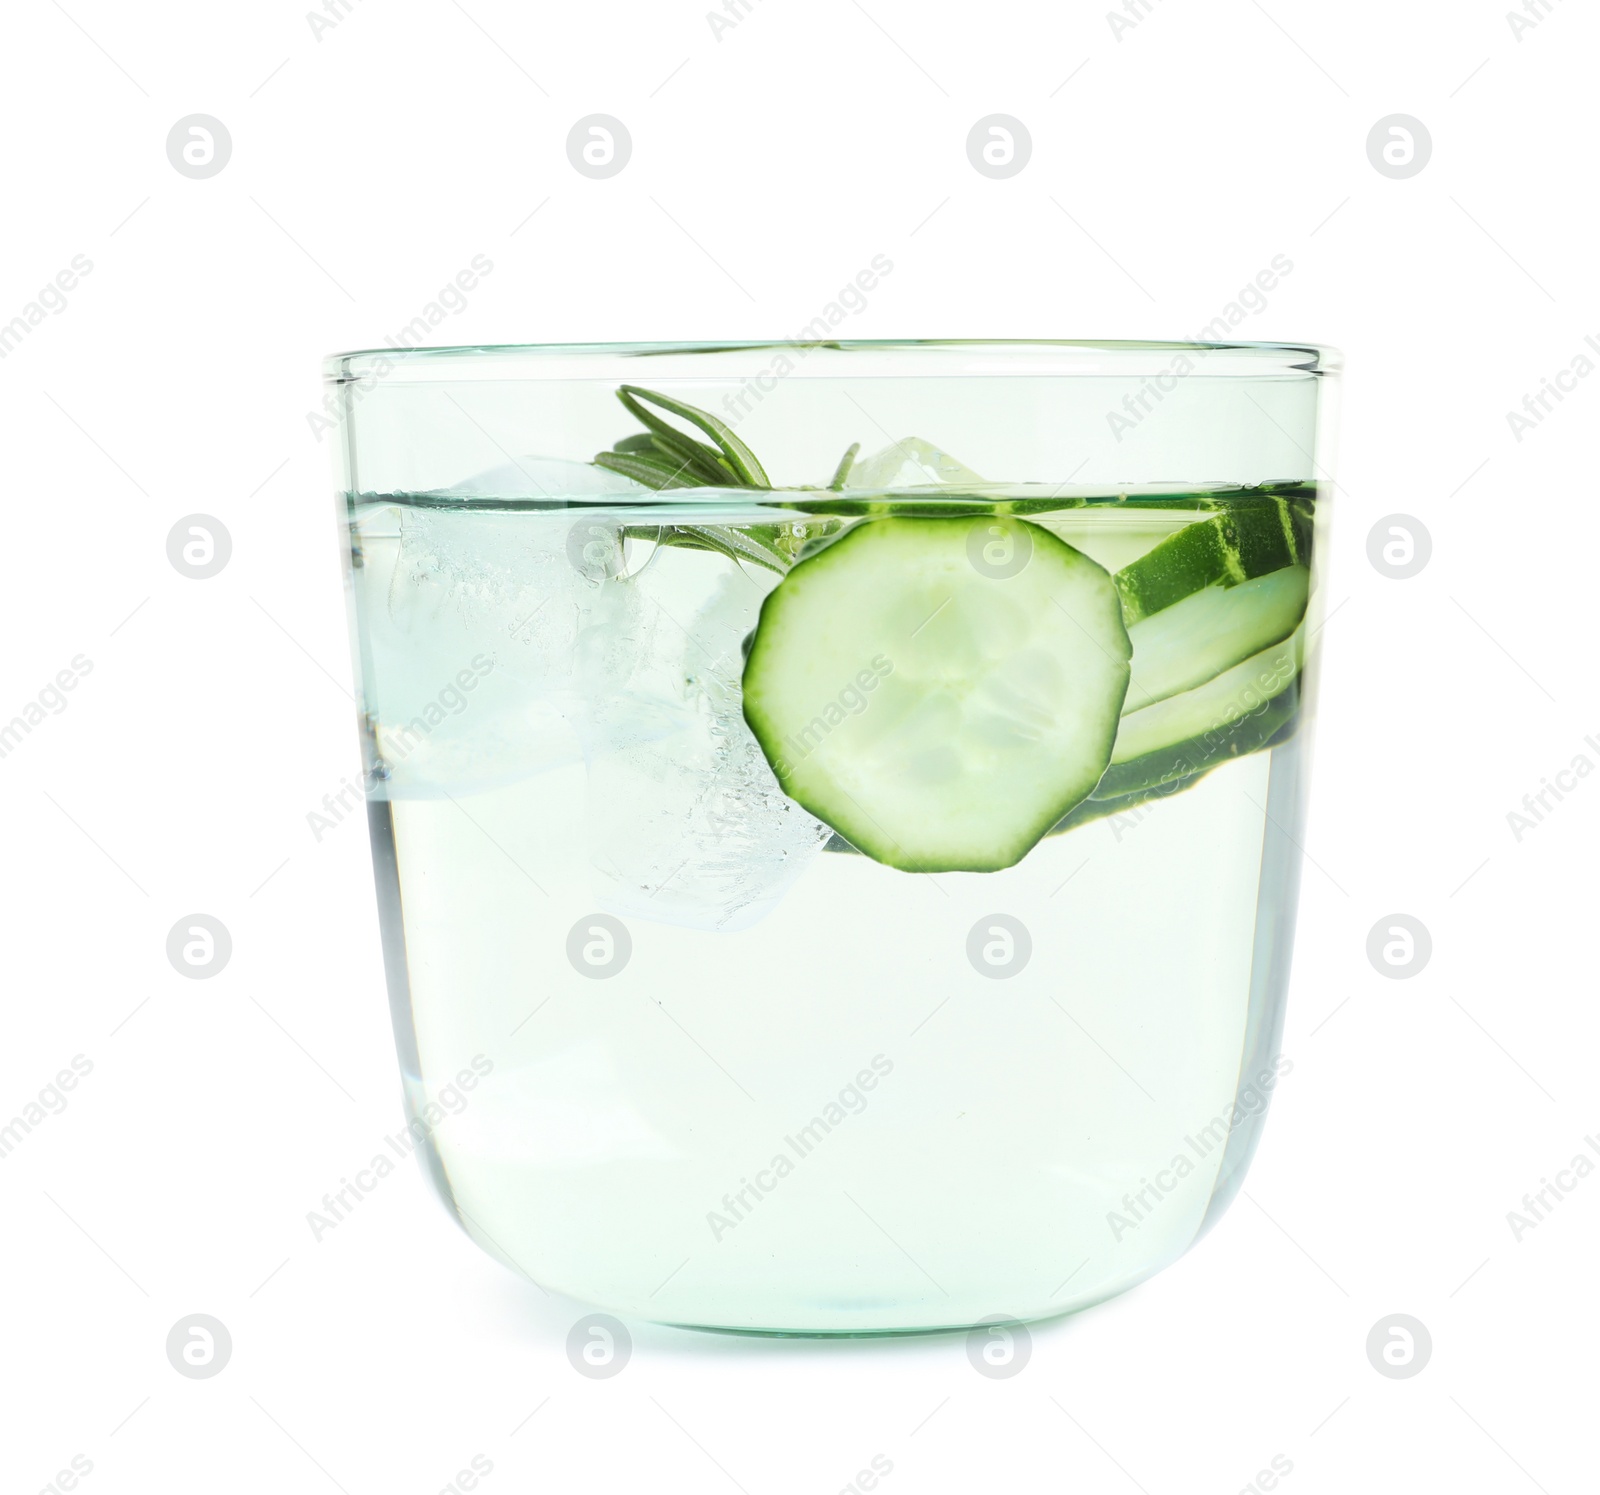 Photo of Glass of fresh cucumber water on white background